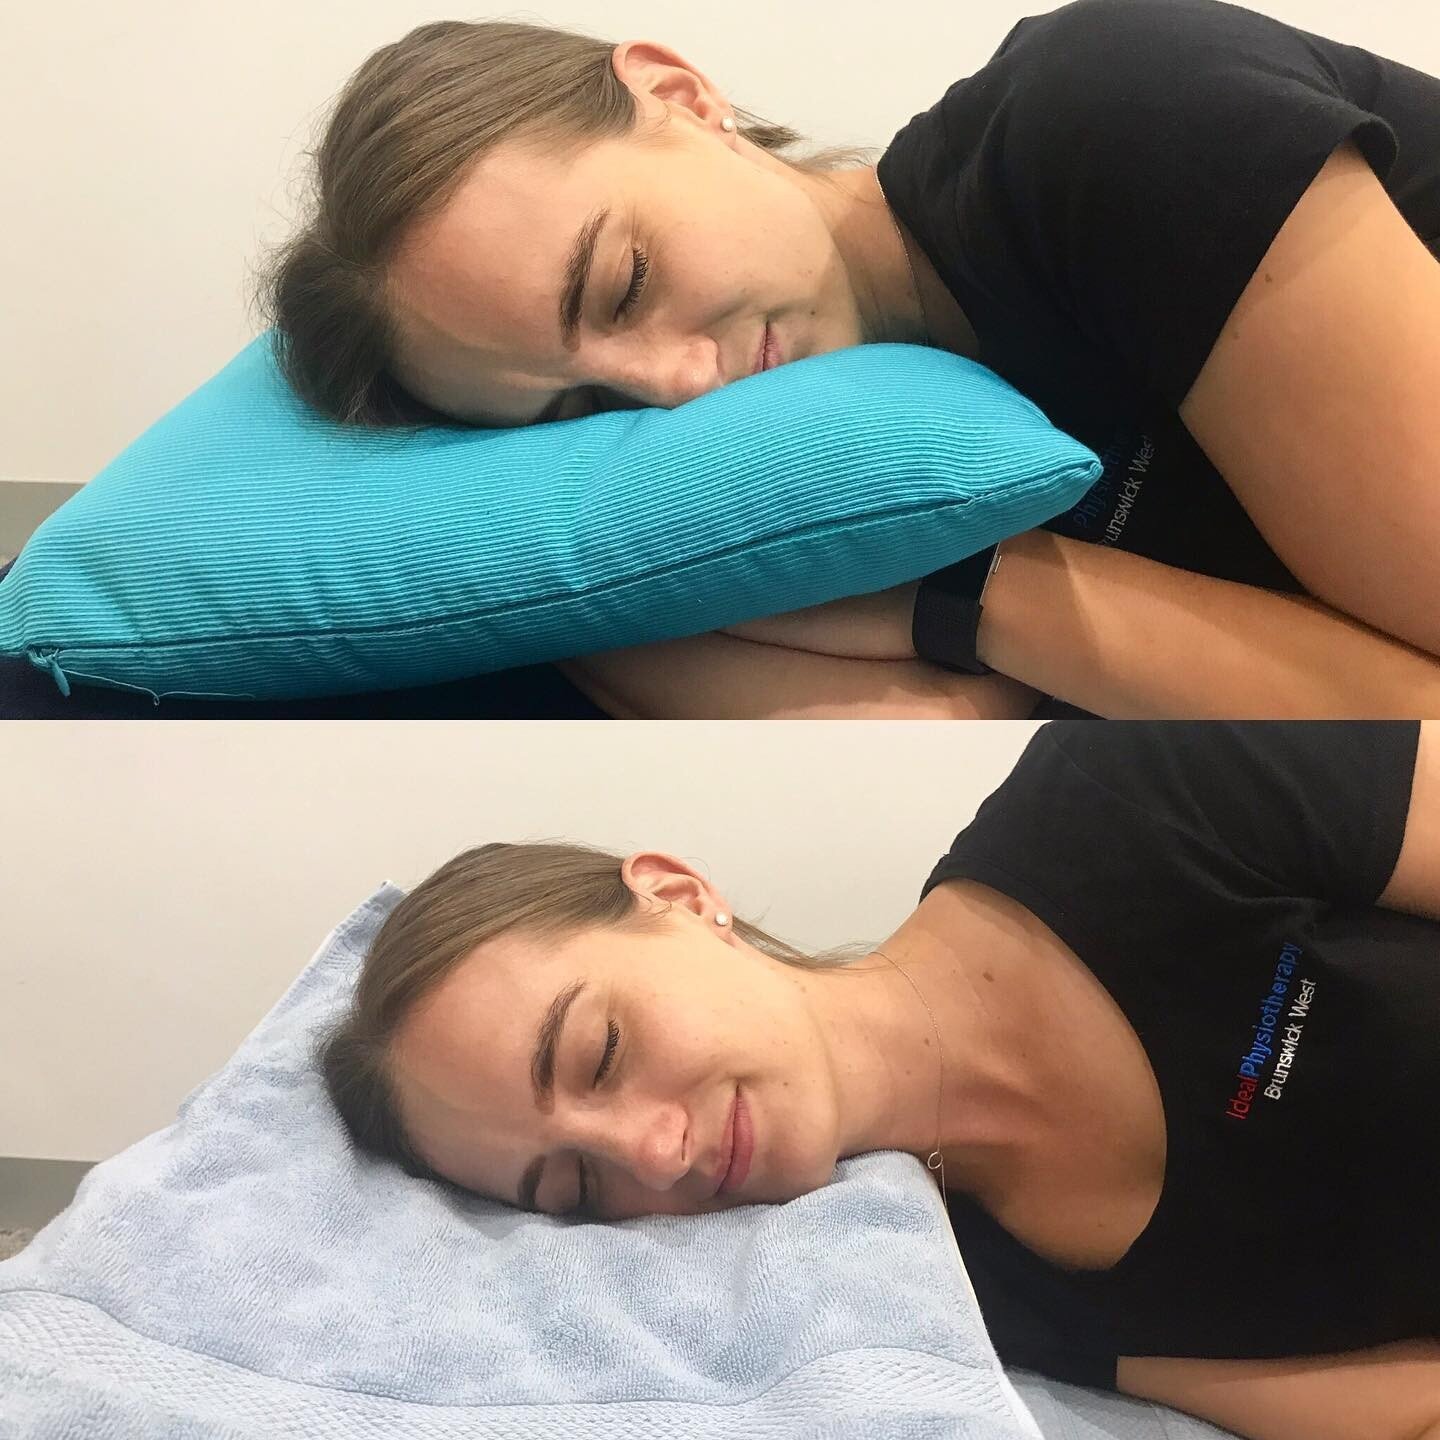 FREE PILLOW AND NECK ASSESSMENT!

Suffering from neck pain, headaches &amp; soreness?

Book in for a free pillow and neck assessment with one of the Physiotherapist at Ideal Physiotherapy today. It takes just 15 minutes! Just bring you pillow with yo